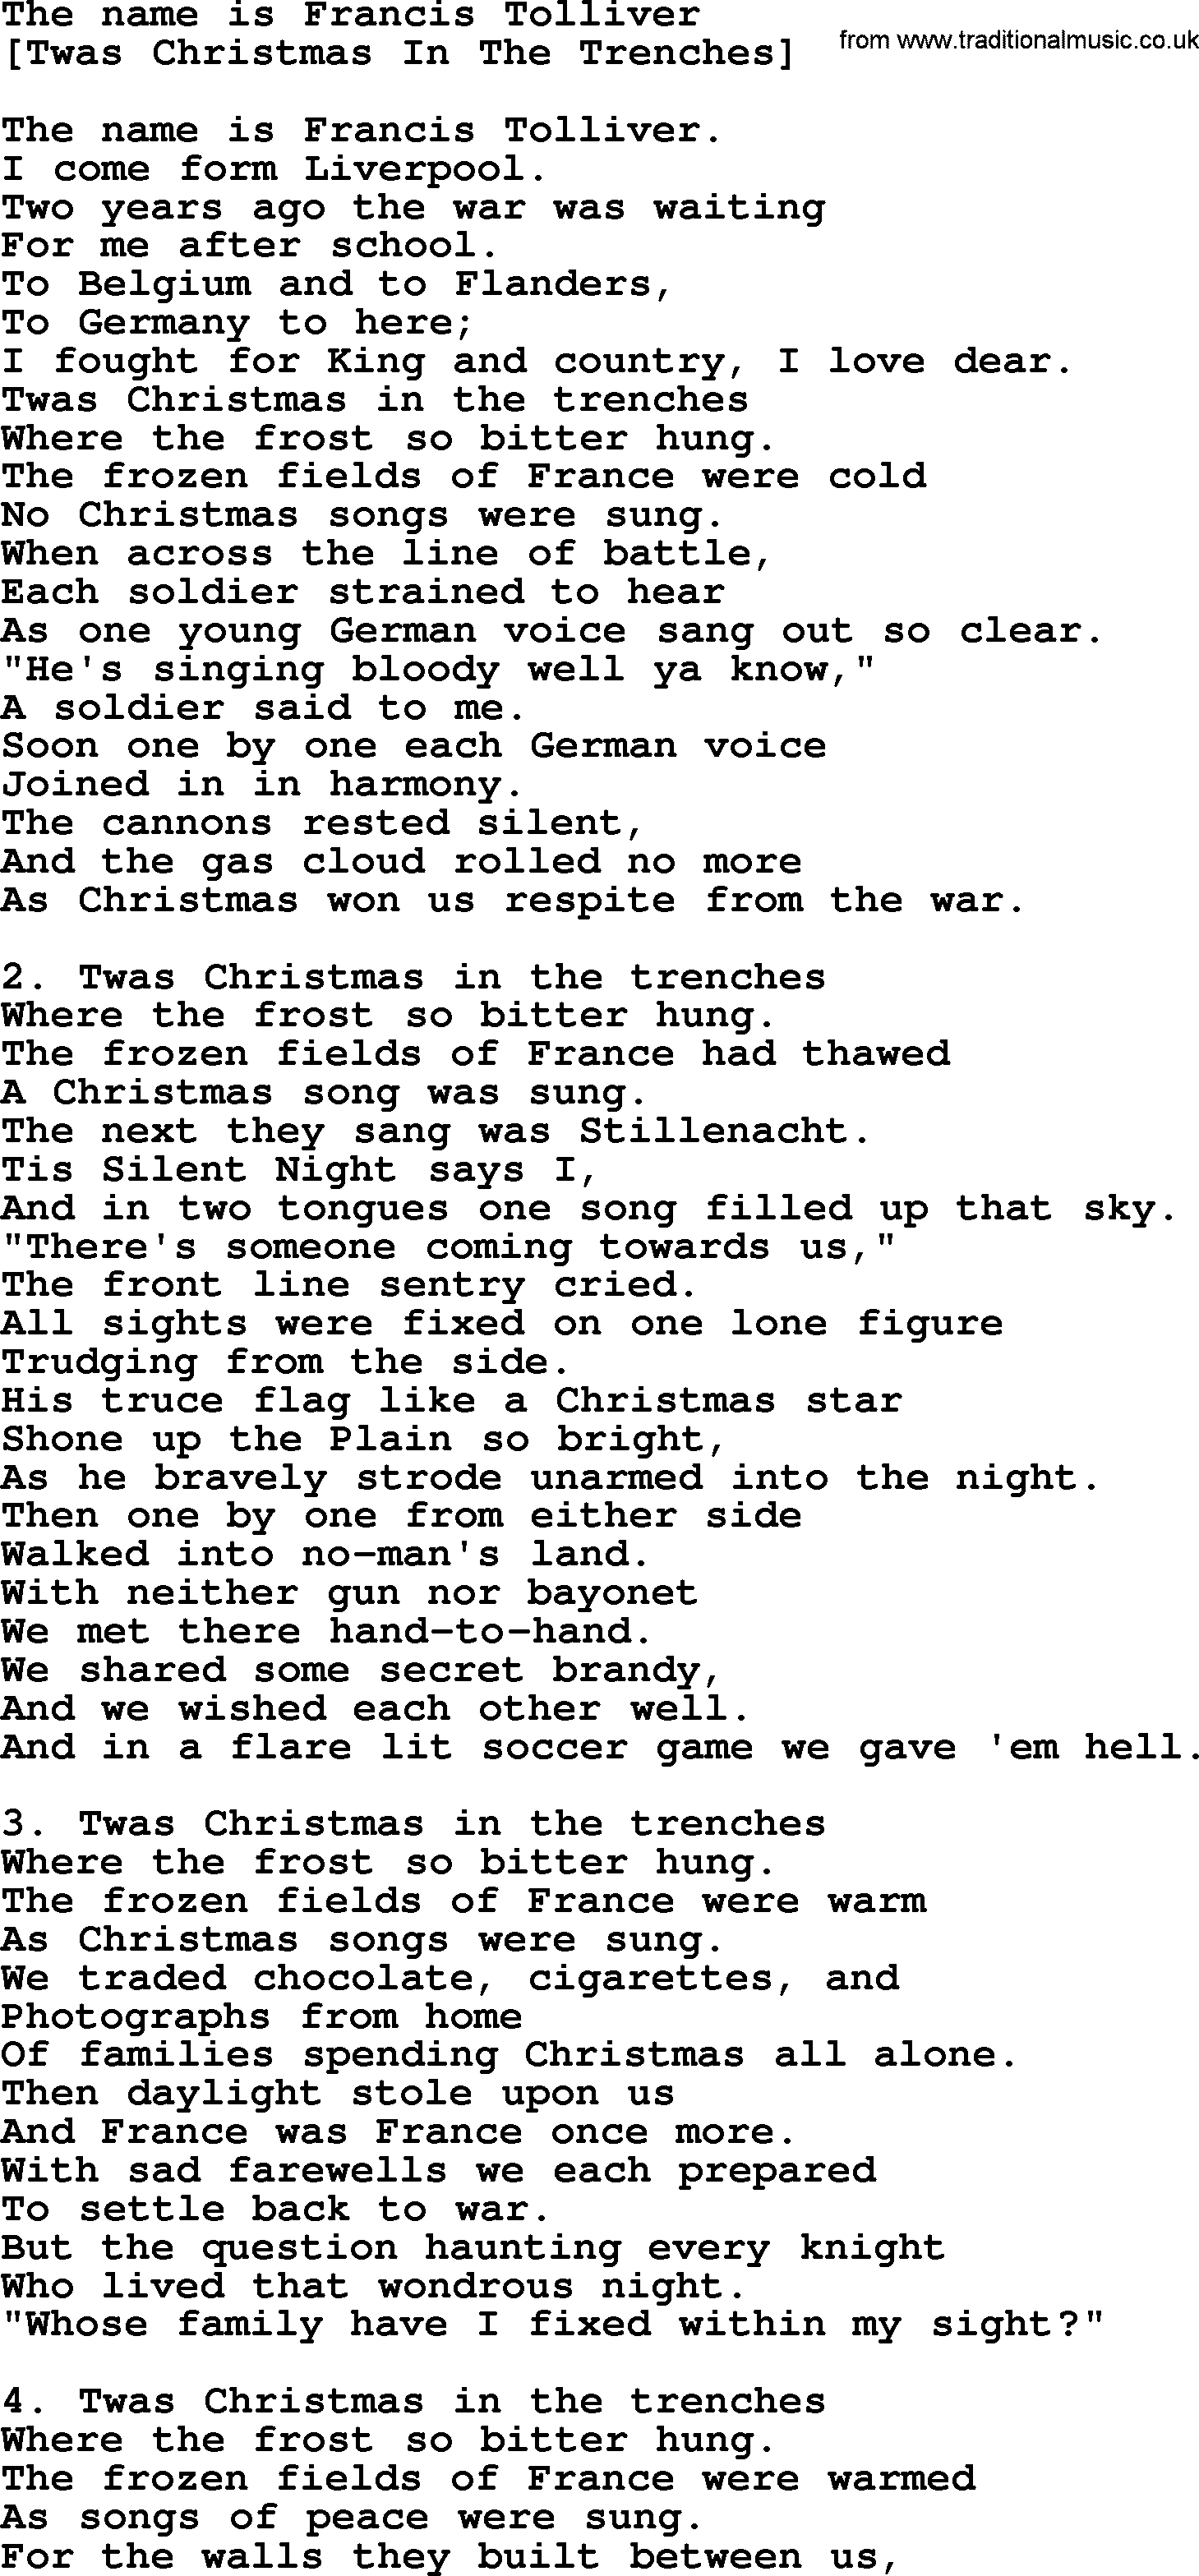 Old English Song: The Name Is Francis Tolliver lyrics